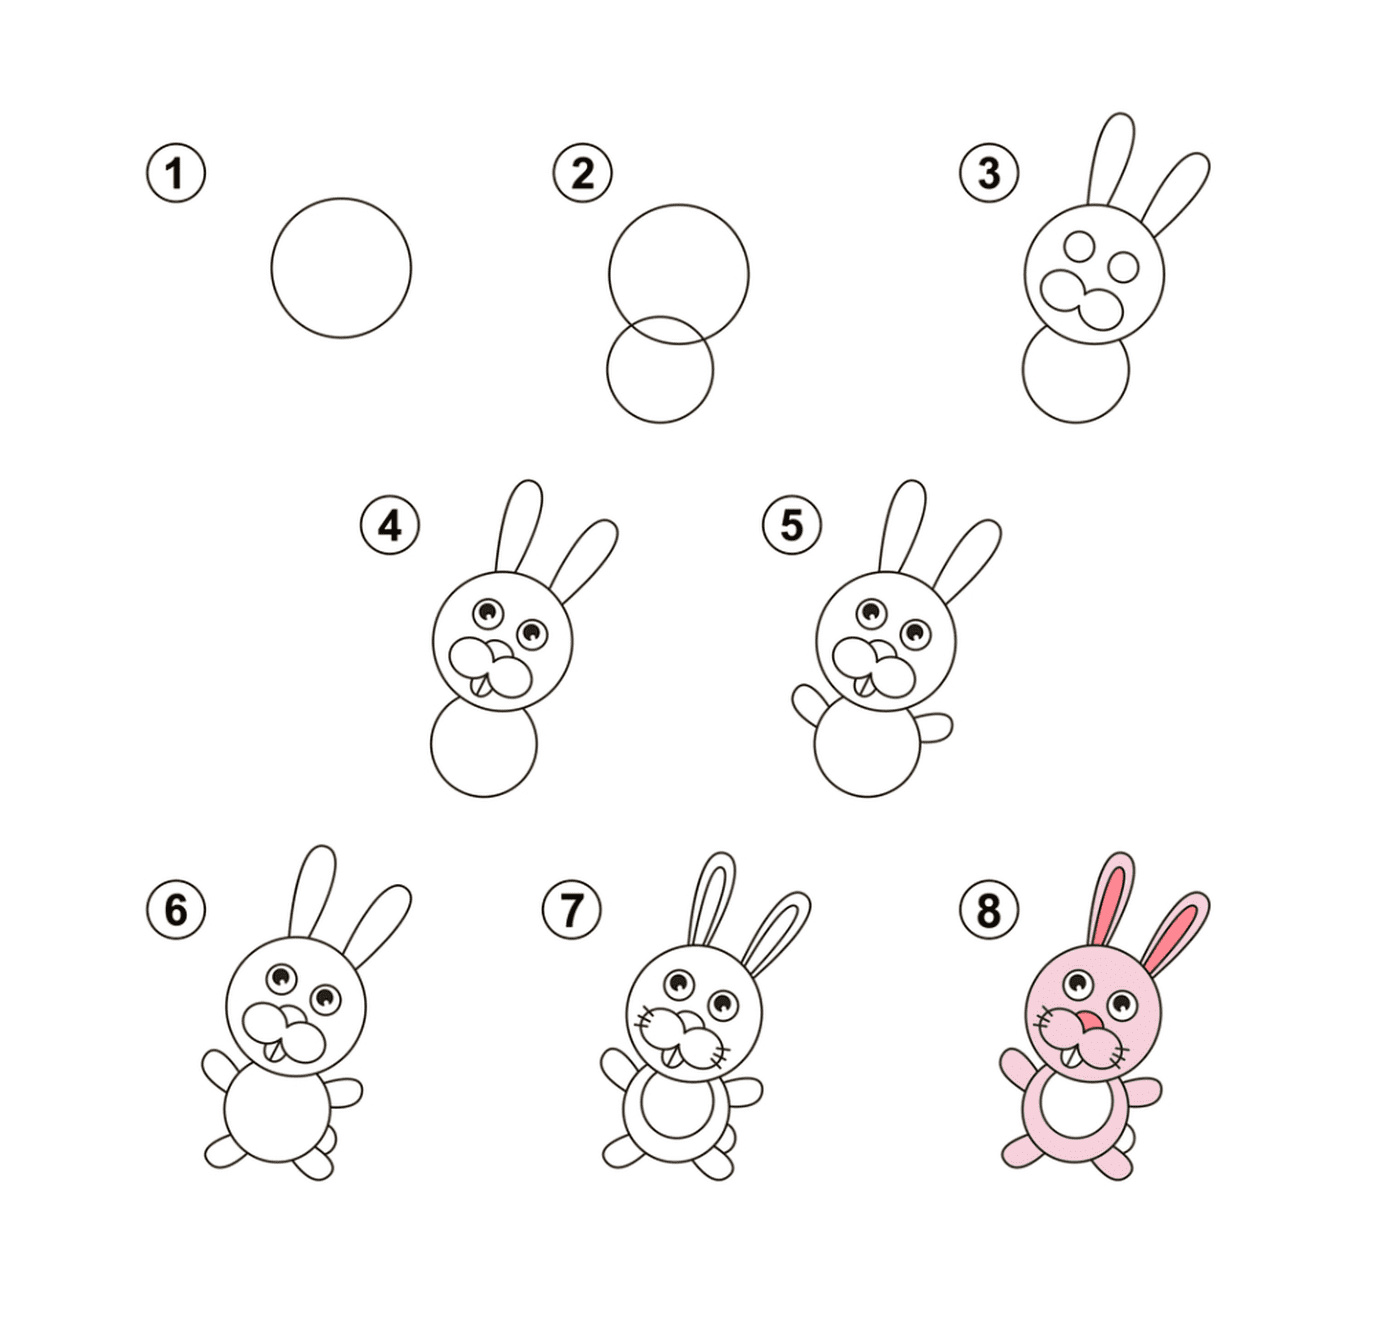  Step by step instructions on how to draw a rabbit 